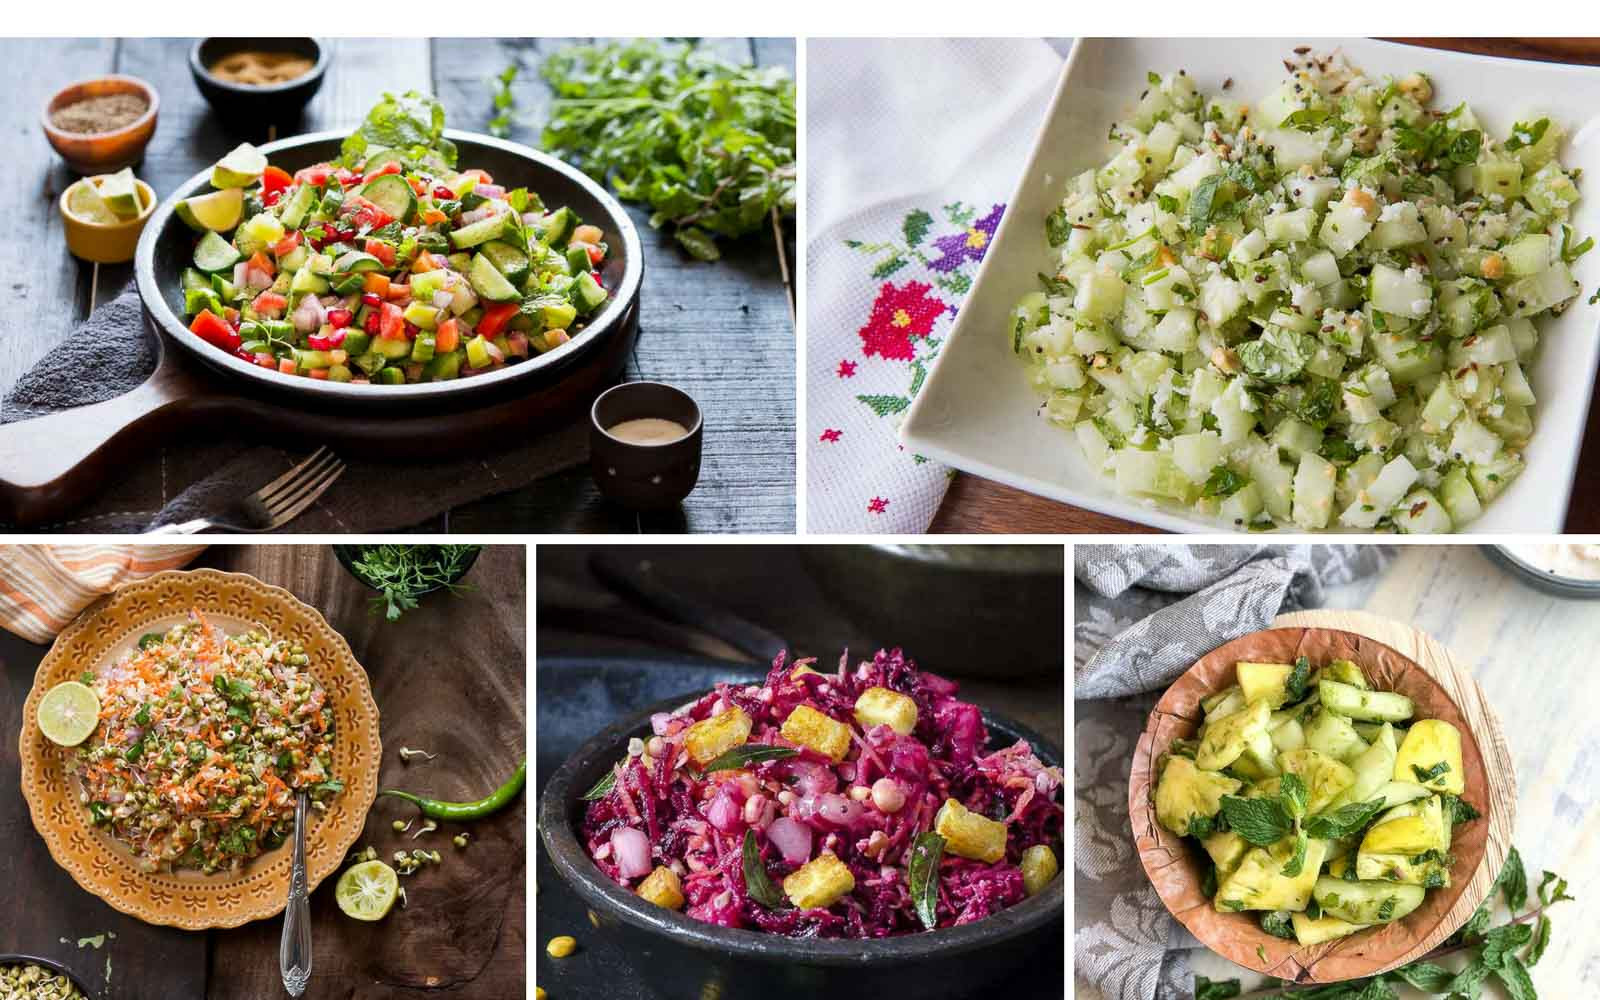 Indian Salad Recipes
 32 Super Healthy Indian Salad Recipes To Make Right Now by